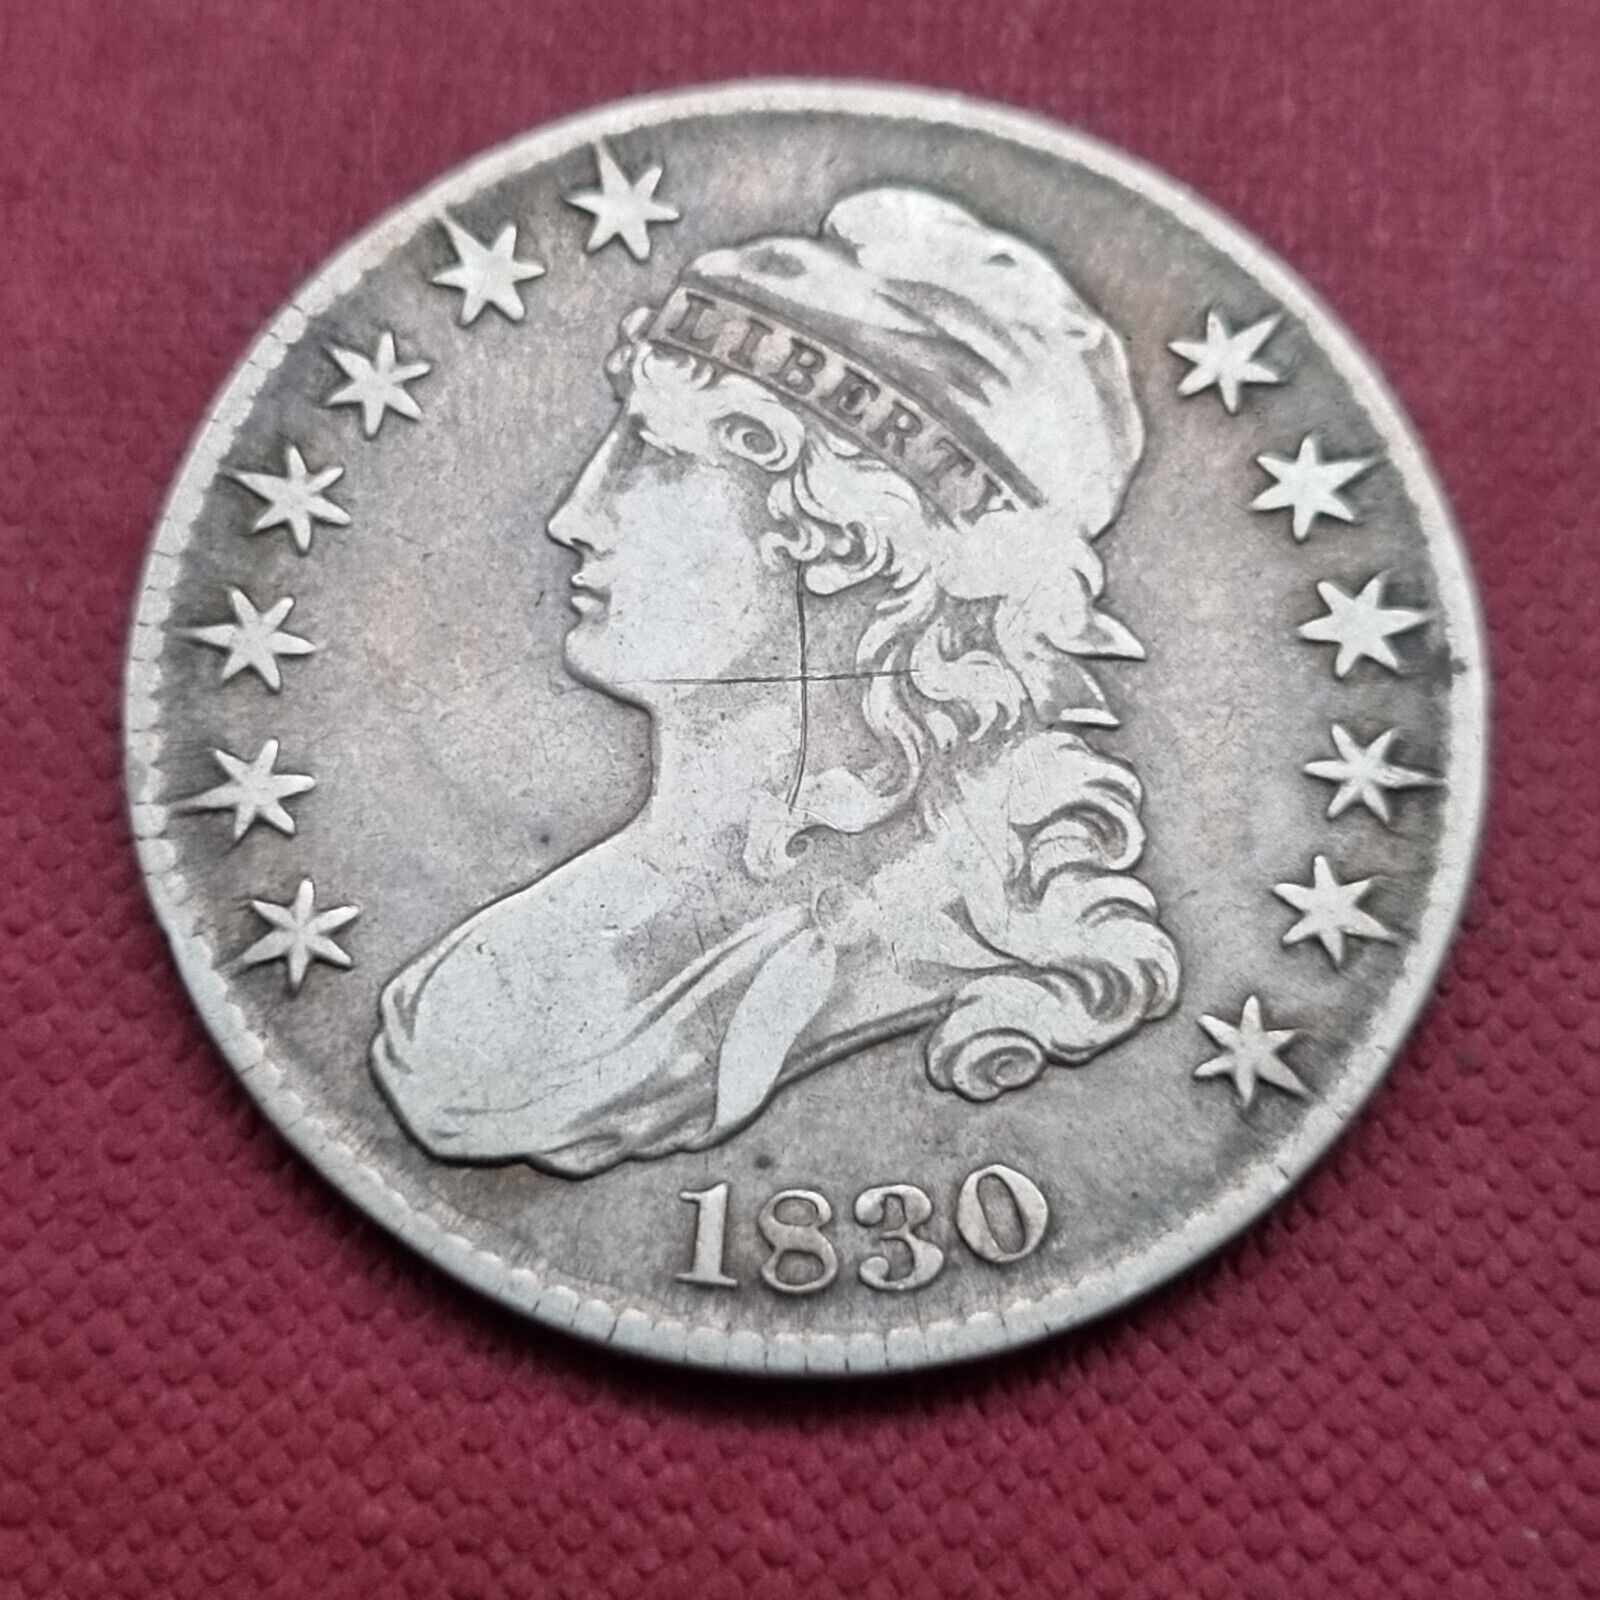 1830 Capped Bust Half Dollar 50c Better Grade Scratched #46794